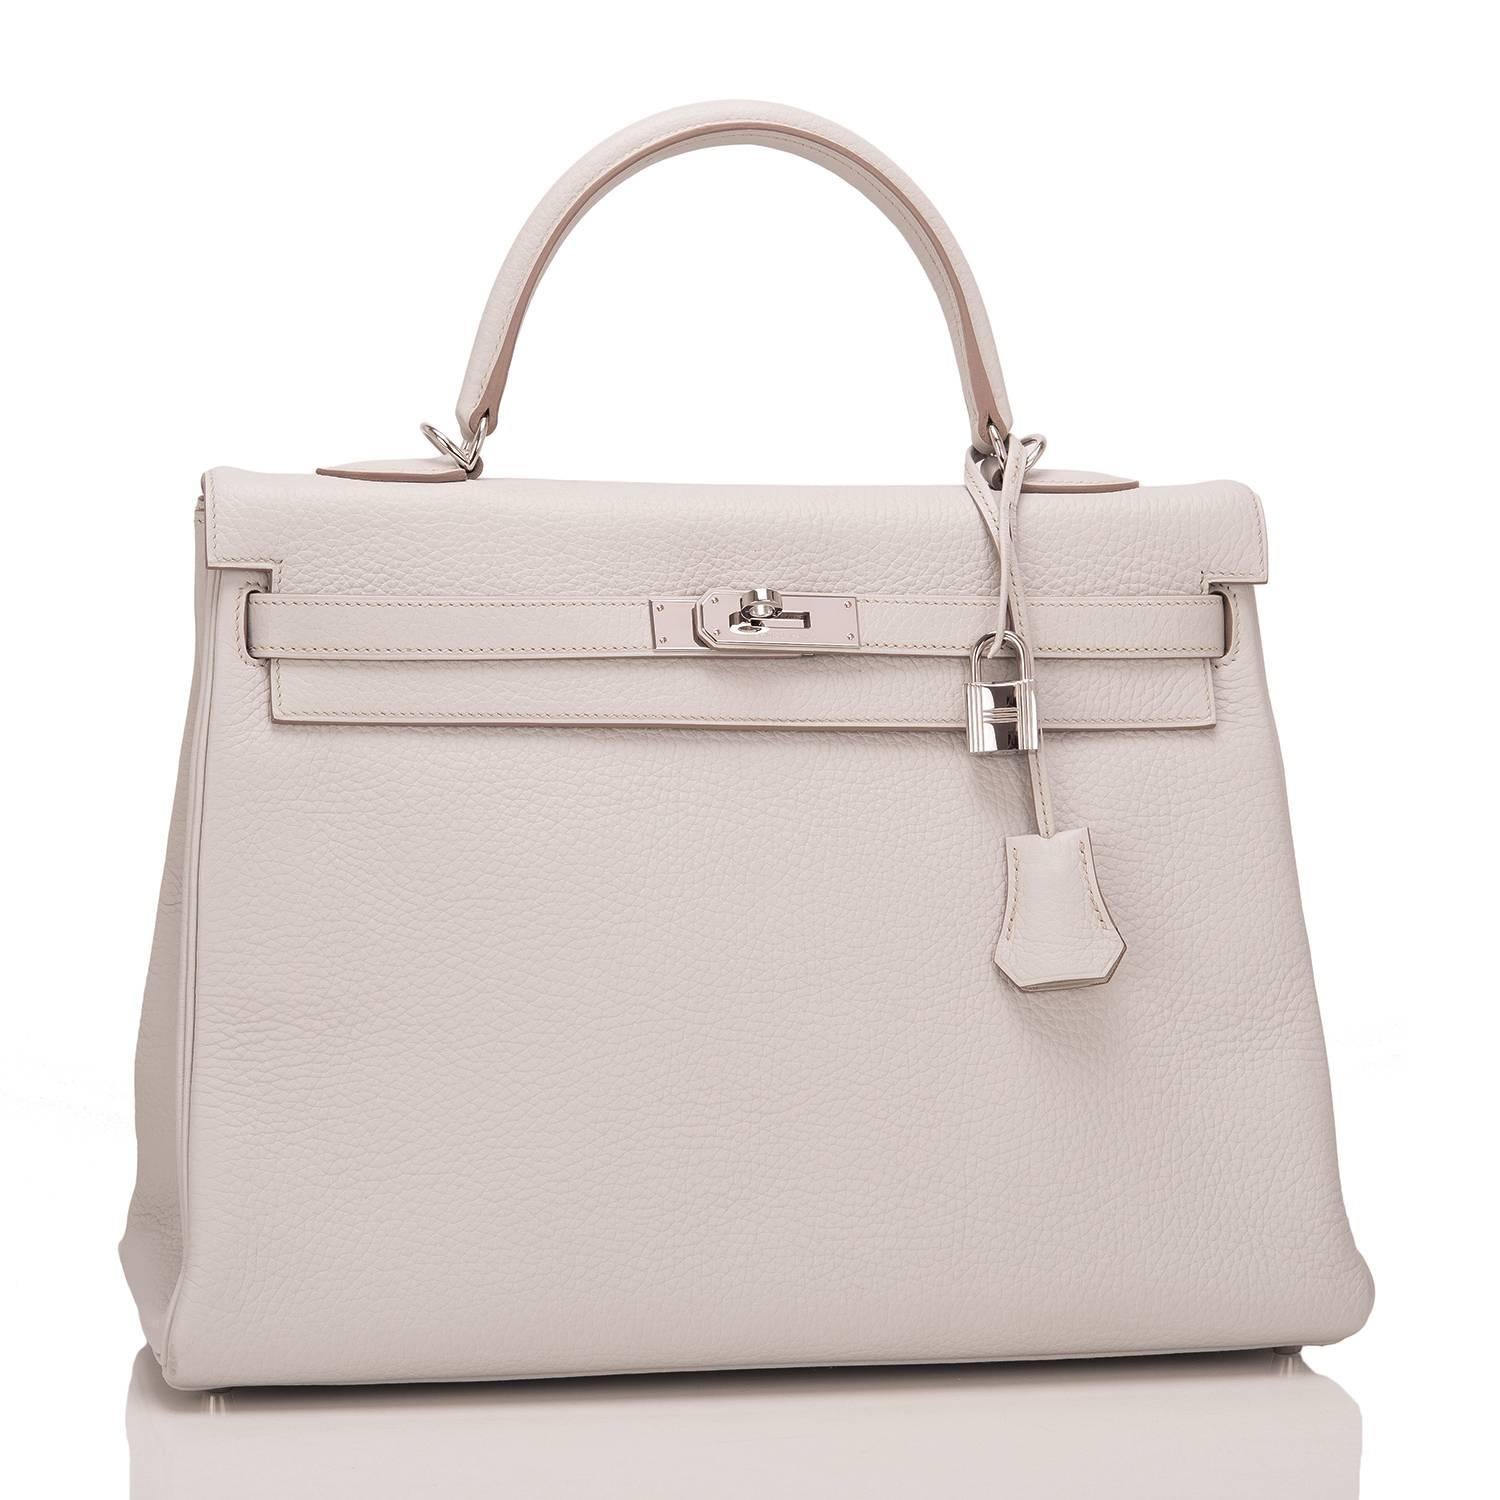 Hermes Gris Perle Kelly 35cm of clemence leather with palladium hardware.

This Kelly has tonal stitching, a front toggle closure, a clochette with lock and two keys, a single rolled handle and an optional shoulder strap.

The interior is lined